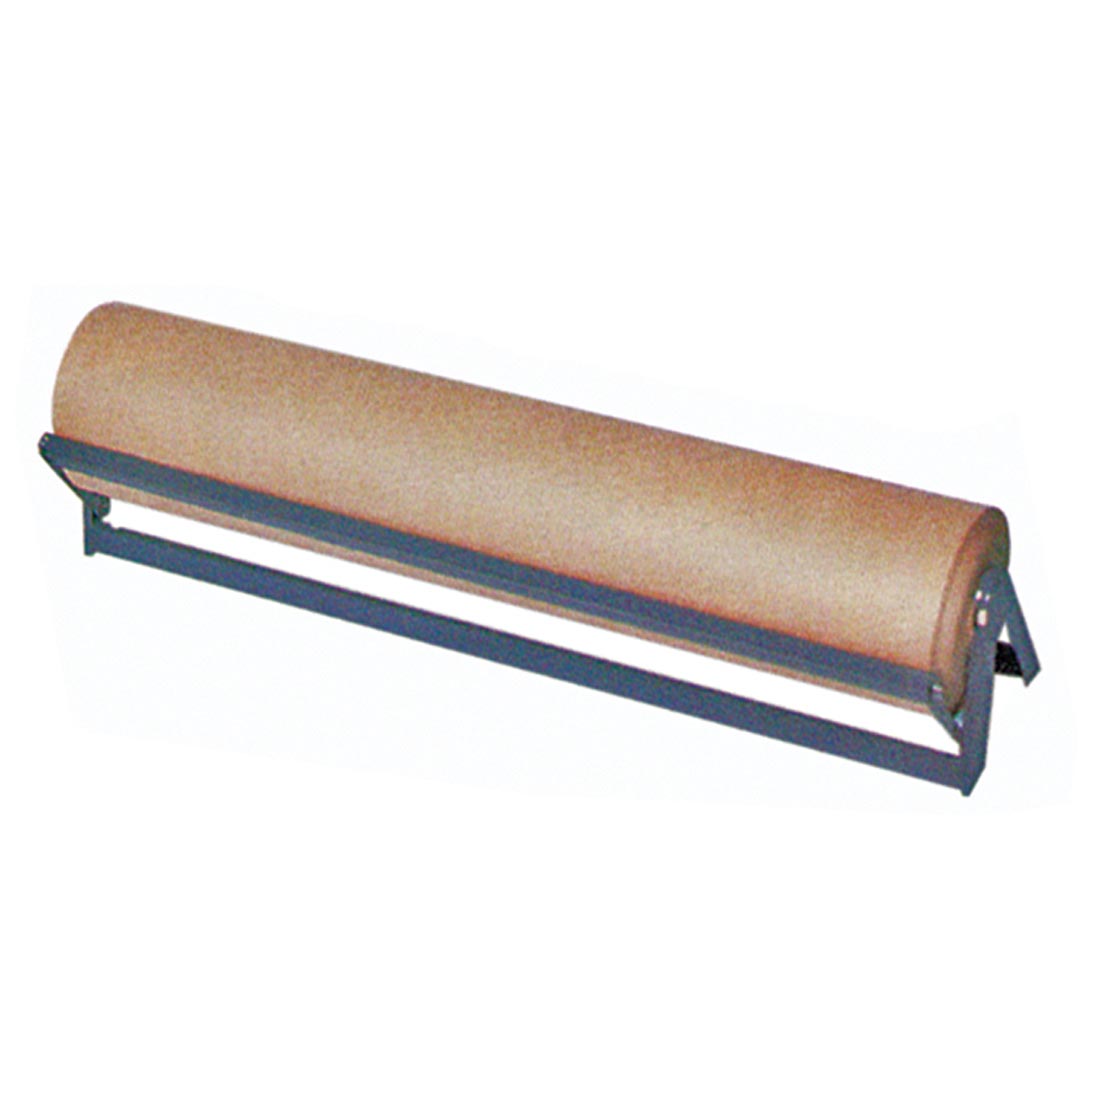 Metal Paper Roll Dispenser & Cutter Shown Loaded With Paper